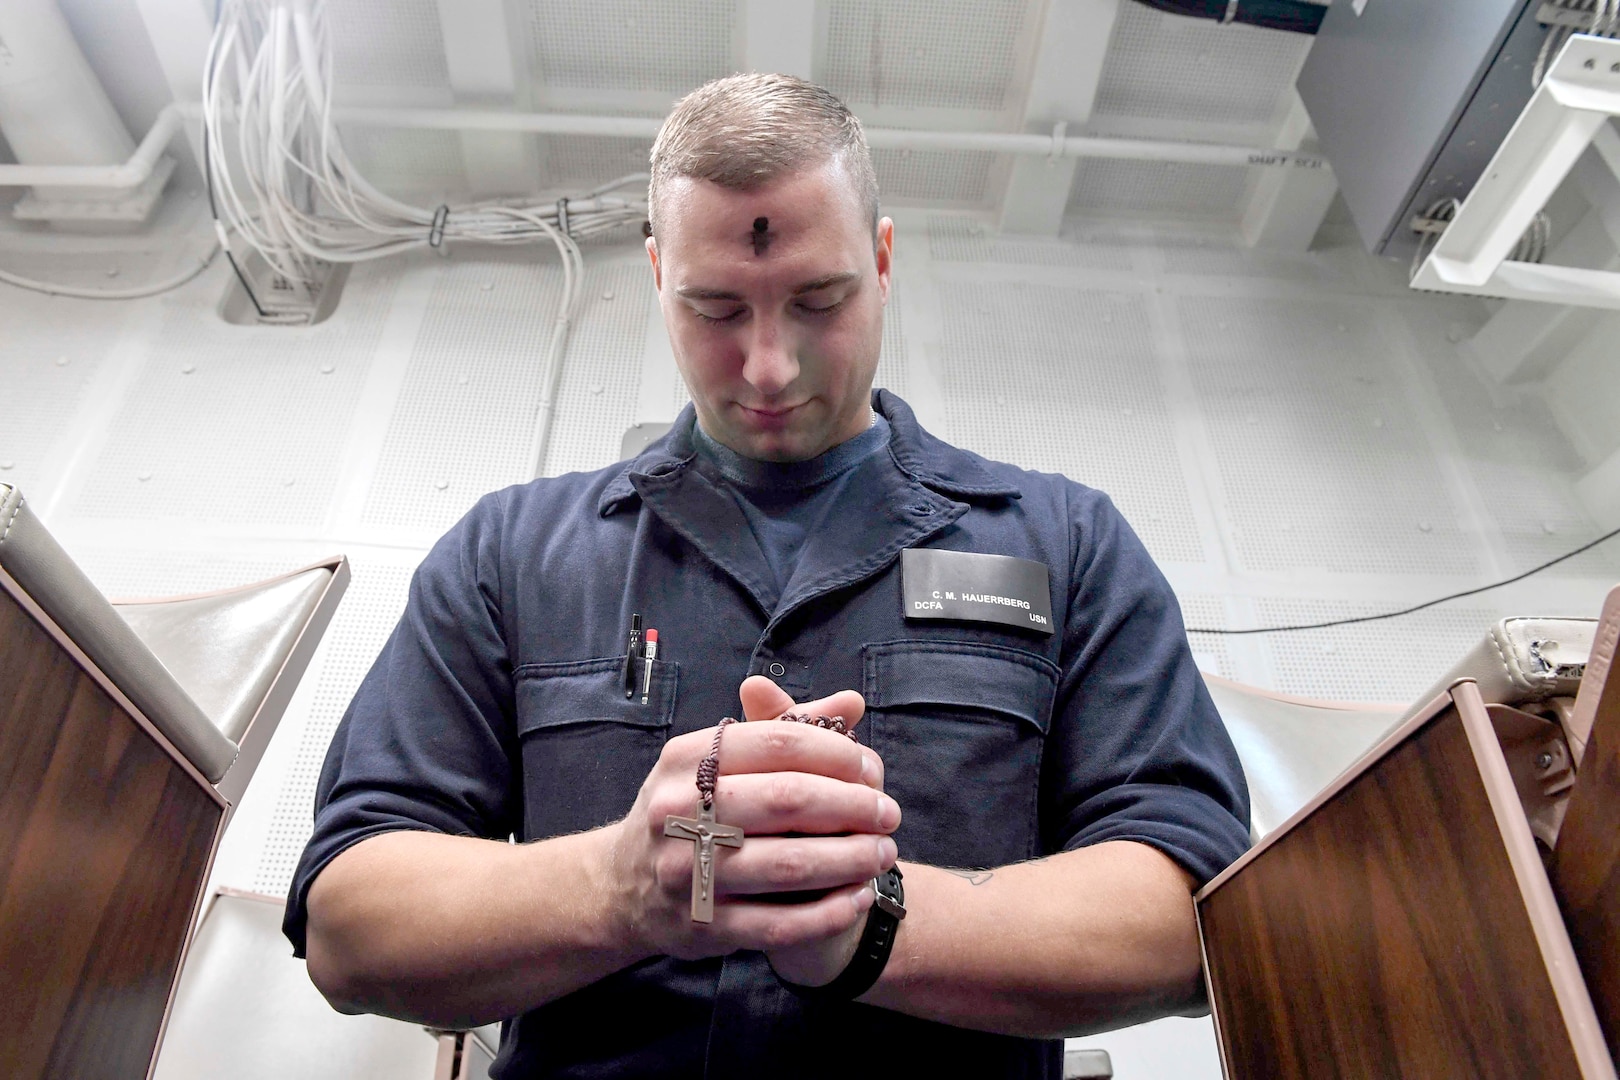 Damage Controlman Fireman Christopher Hauerrberg, from Chicago, prays during an Ash Wednesday service aboard Arleigh Burke-class guided-missile destroyer USS Wayne E. Meyer.